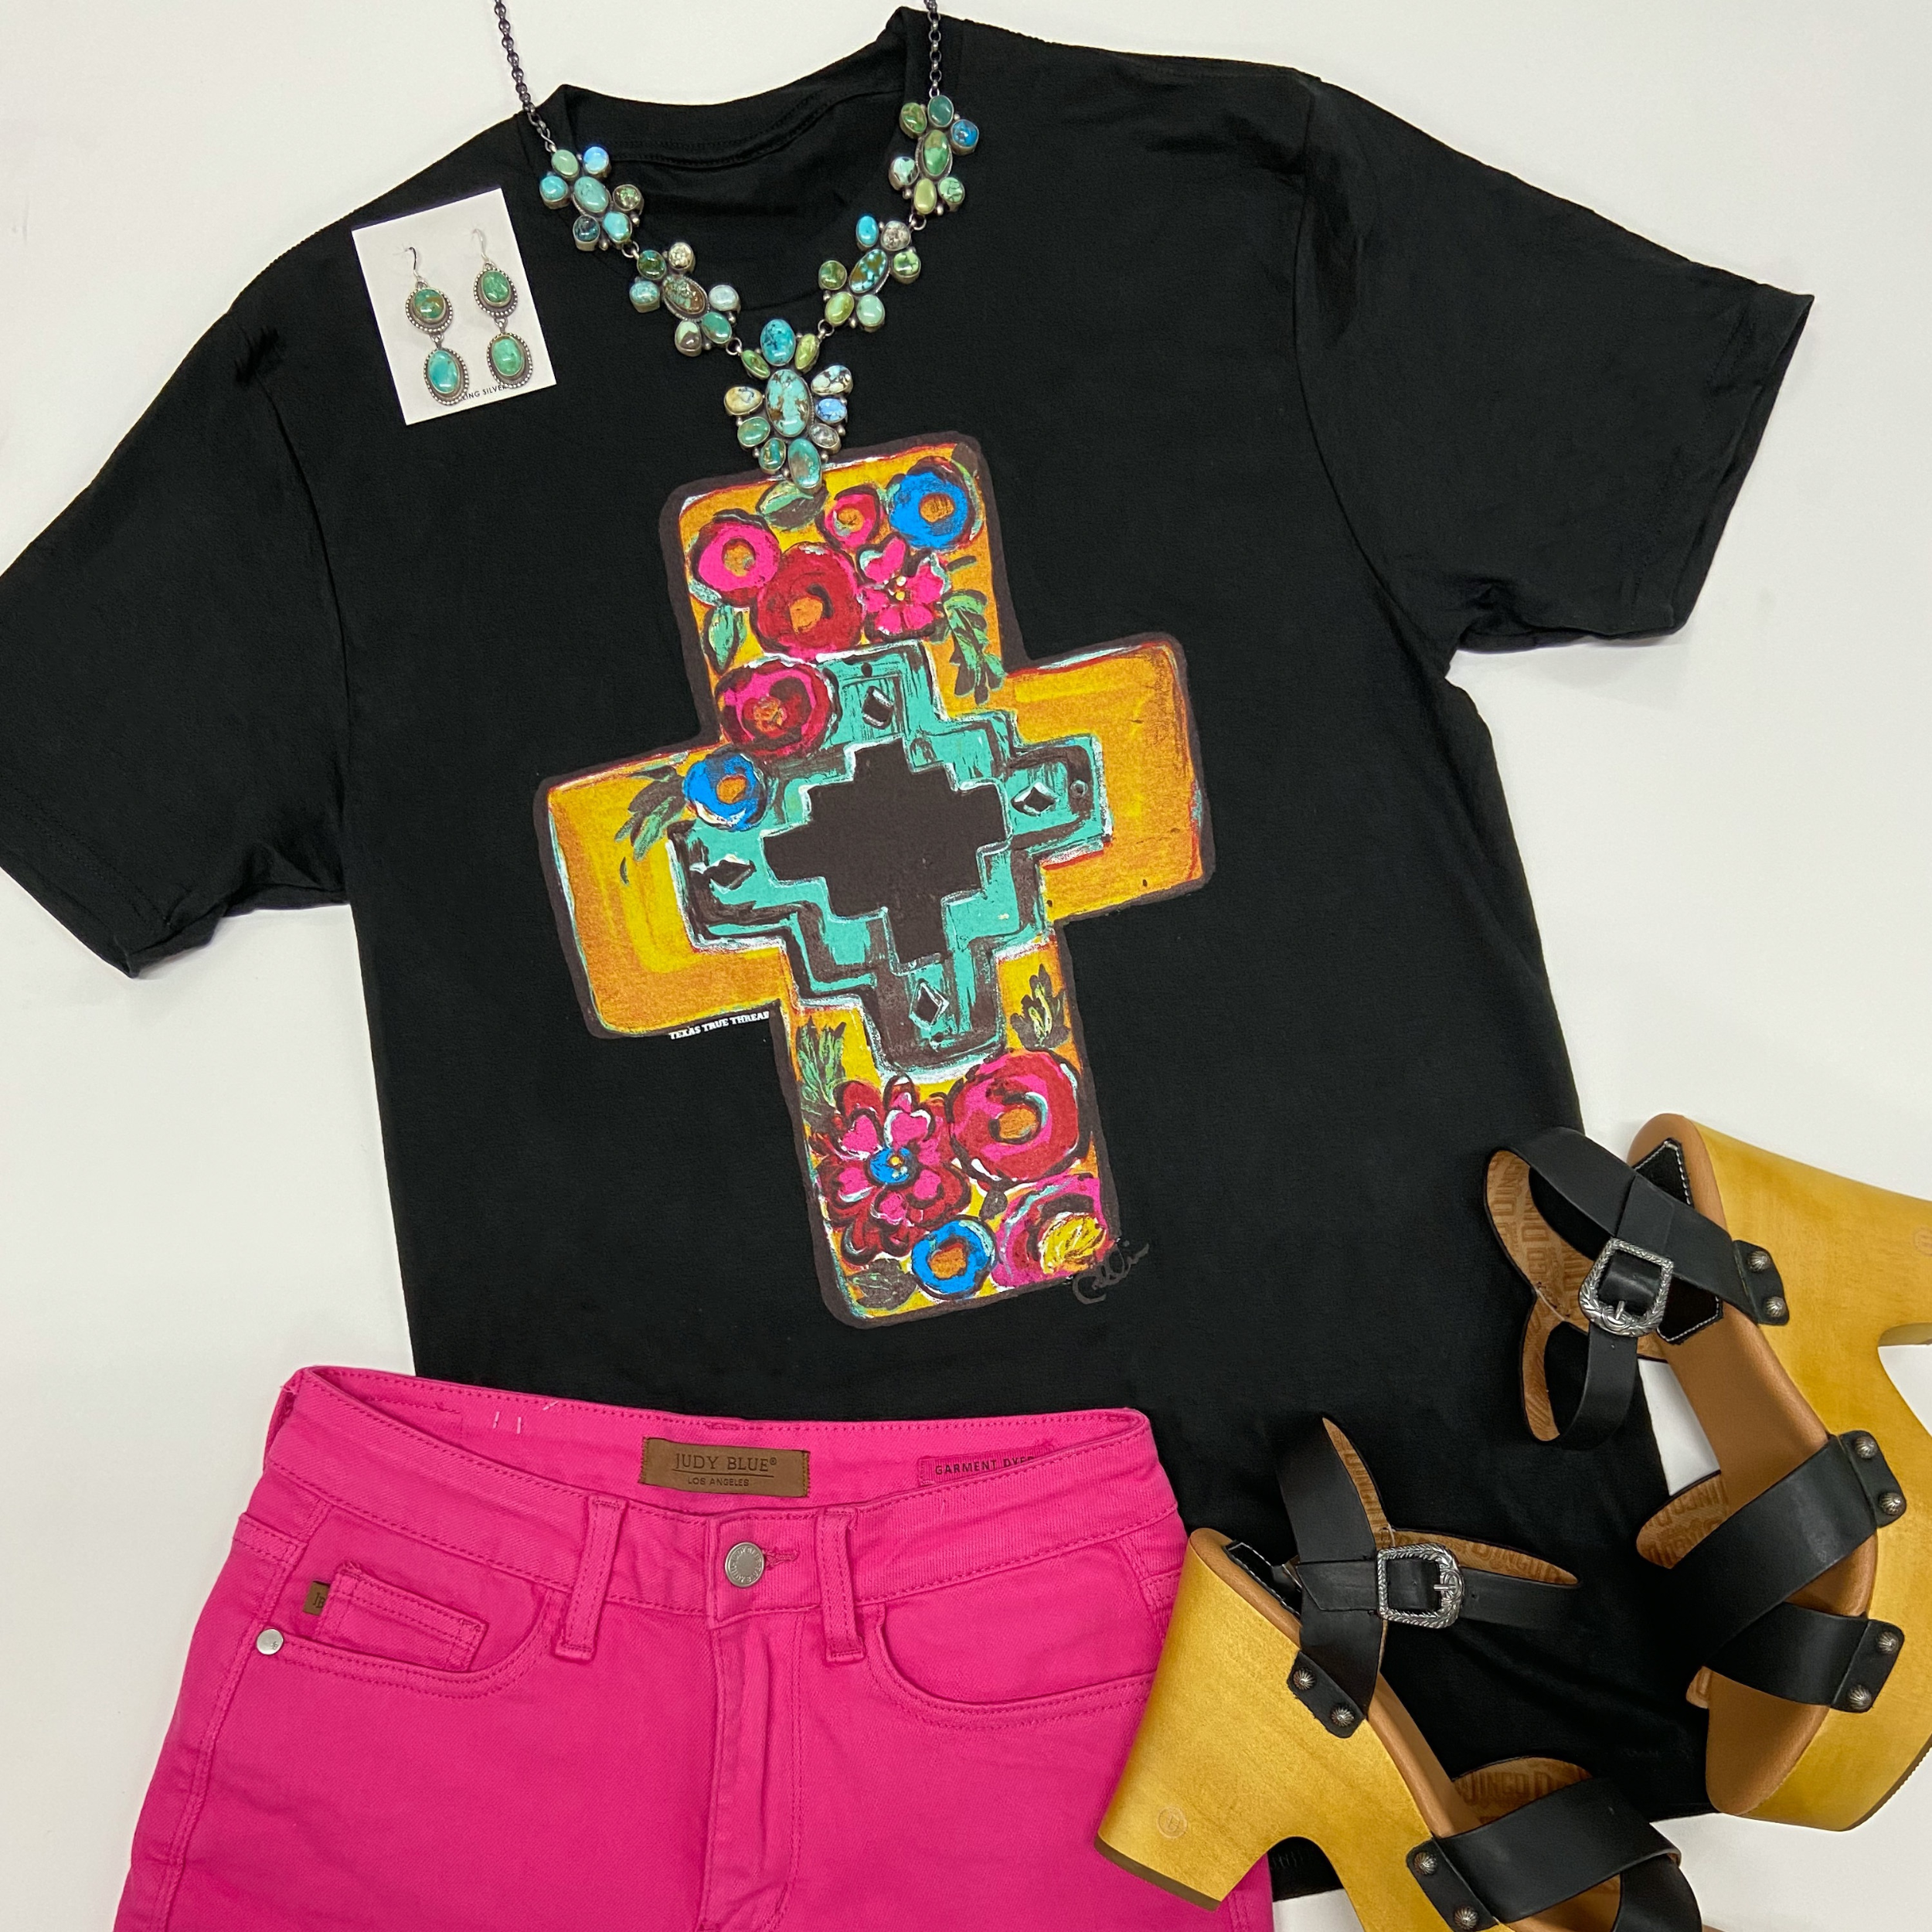 A black tee shirt with a crew neckline, short sleeves, and a graphic of a mustard yellow cross with flowers. This tee is pictured on a white background with pink shorts, black heels, and Navajo jewelry.